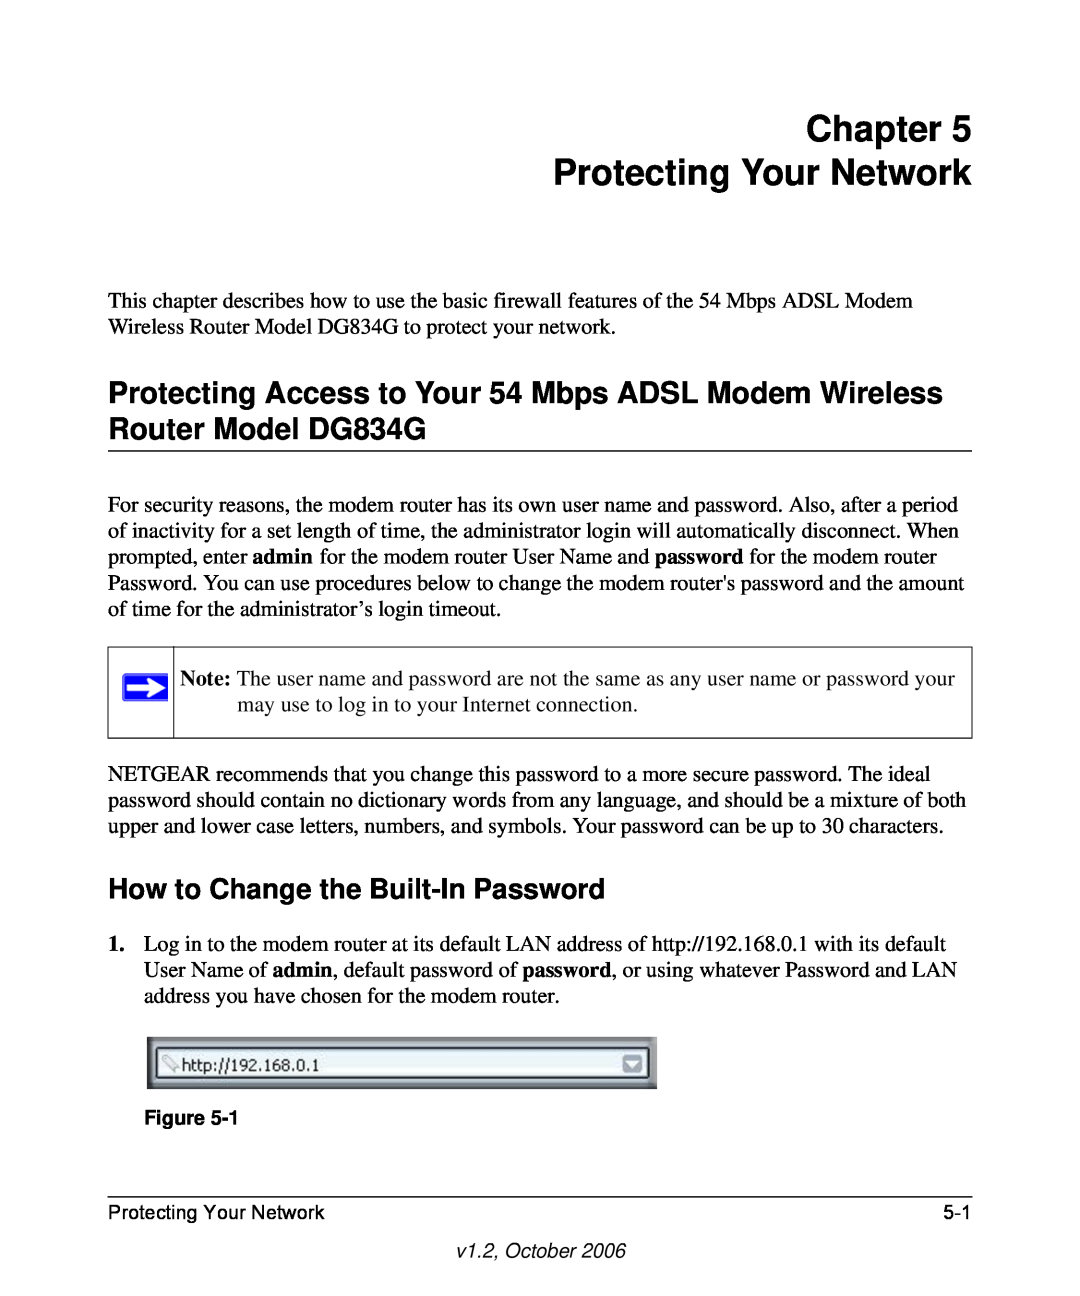 NETGEAR DG834G manual Chapter Protecting Your Network, How to Change the Built-In Password 